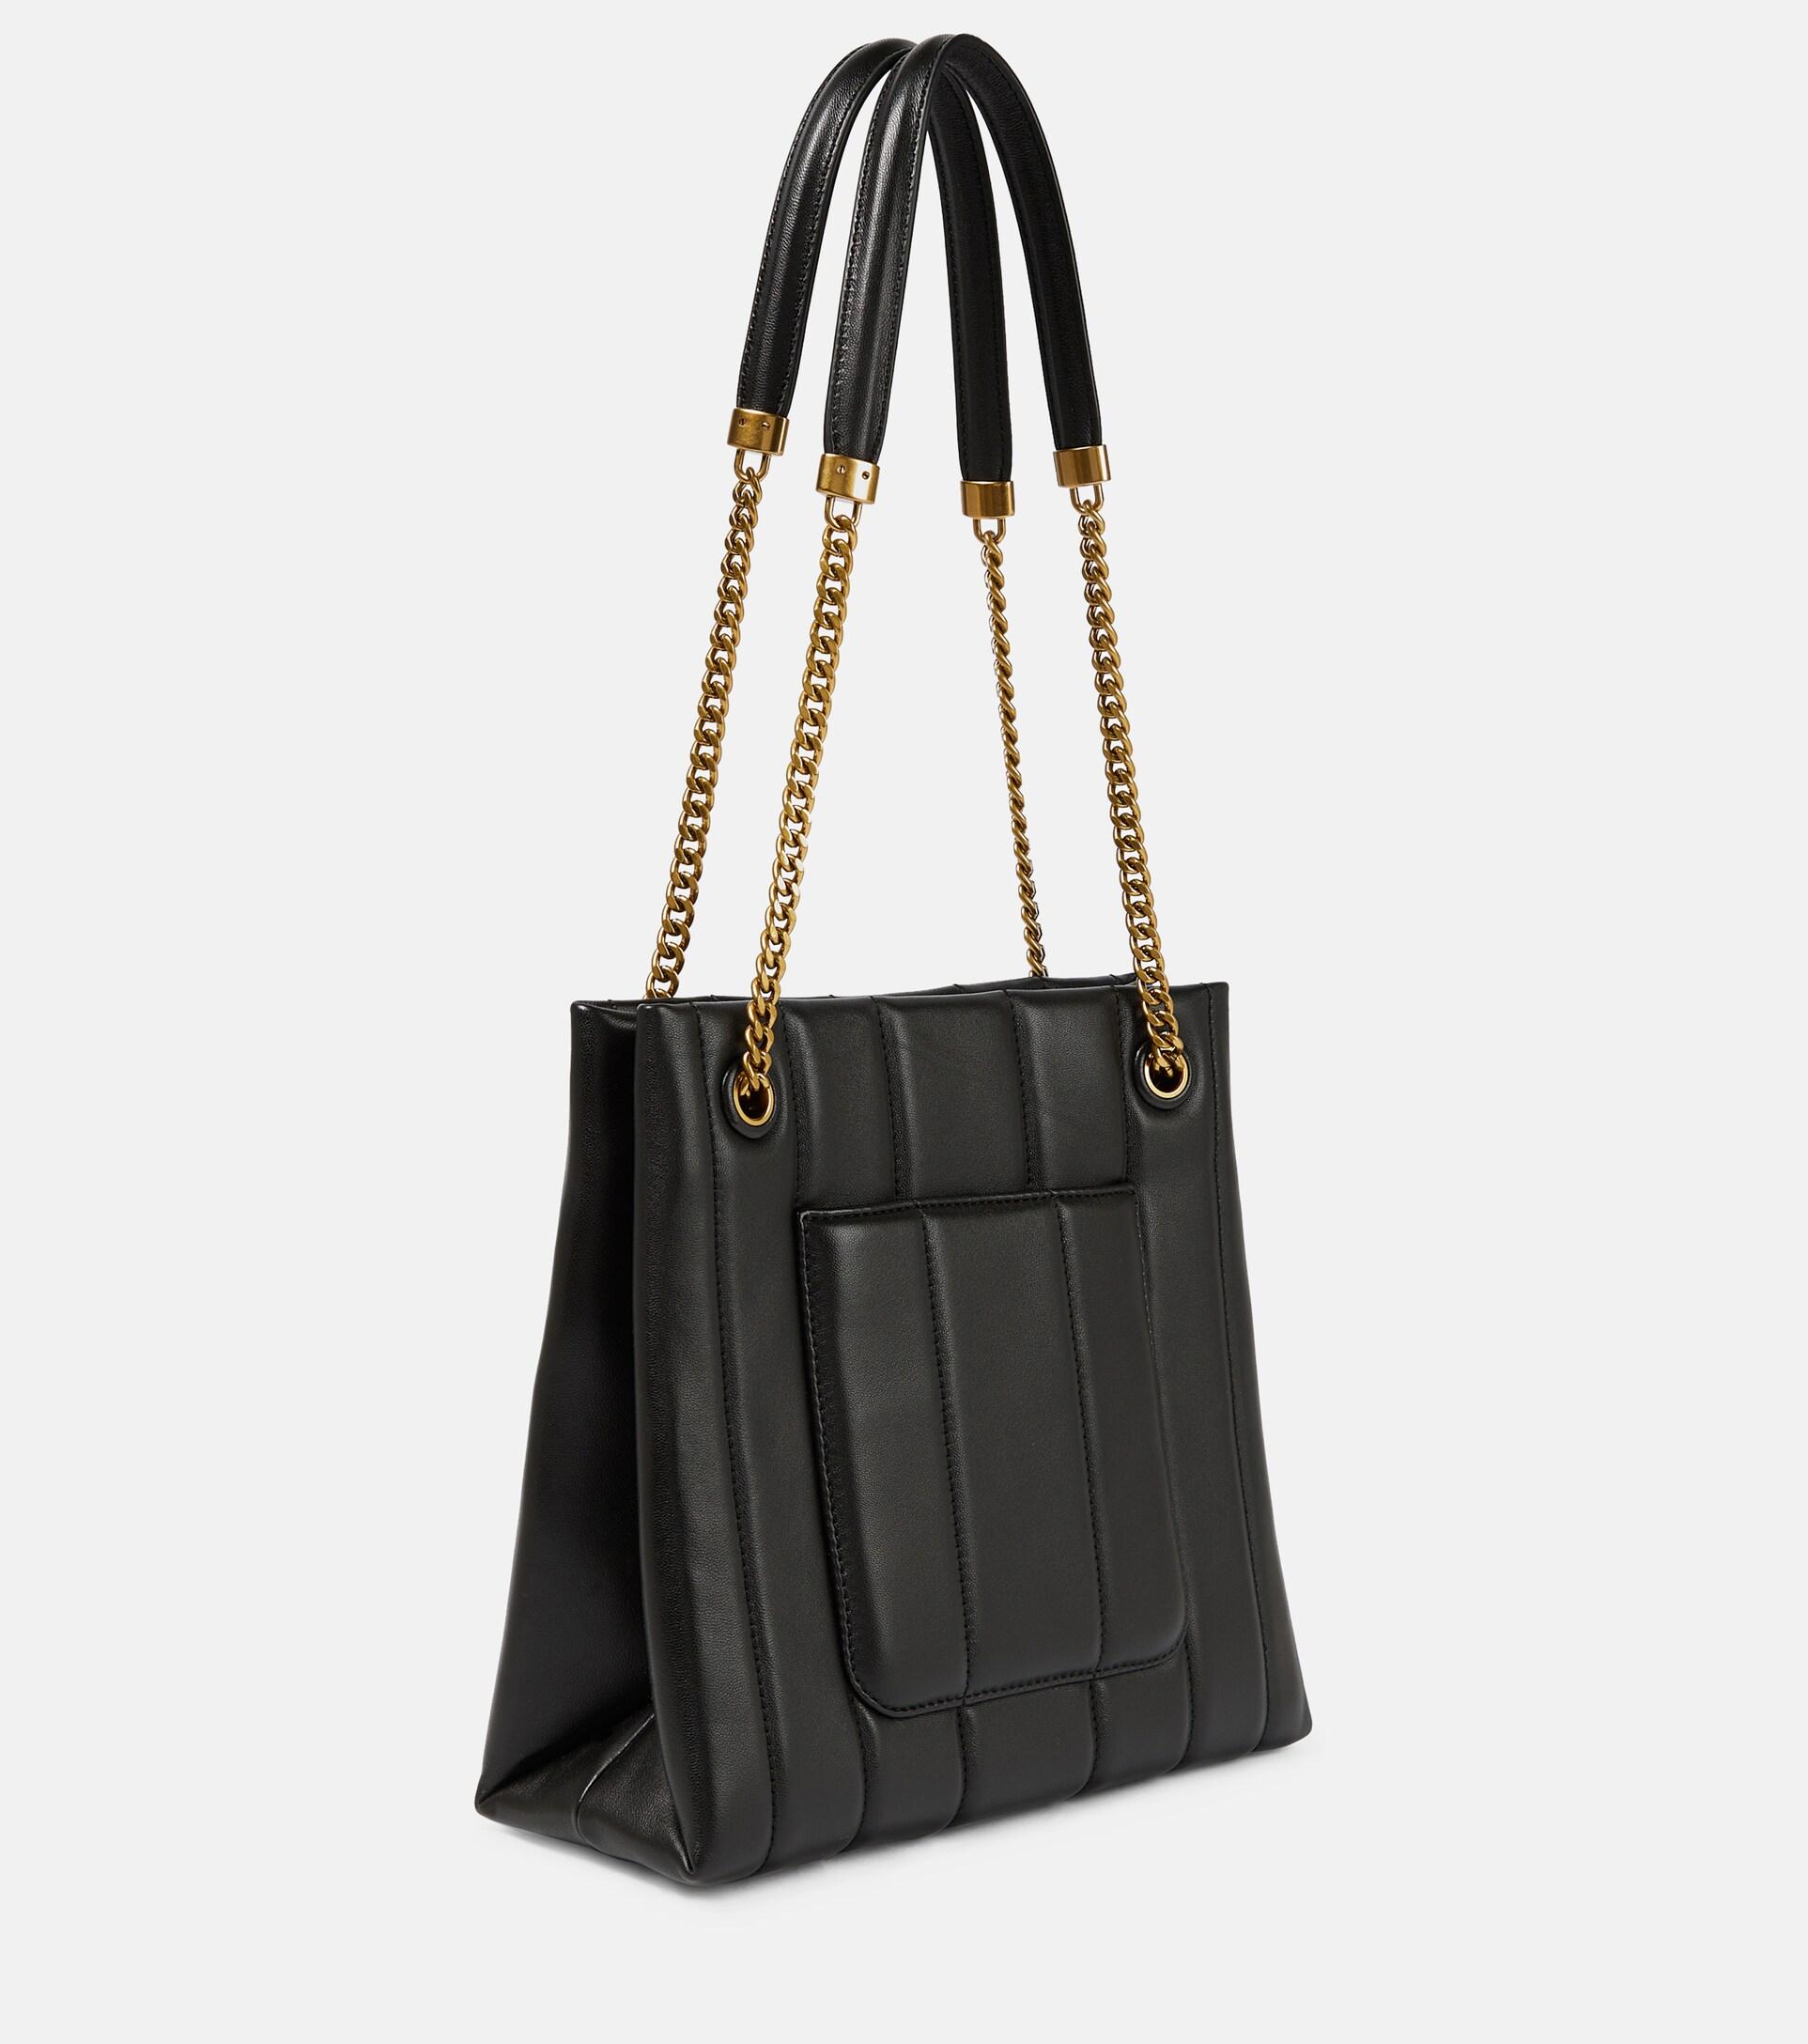 Tory Burch Kira Medium Quilted Leather Tote Bag in Black | Lyst